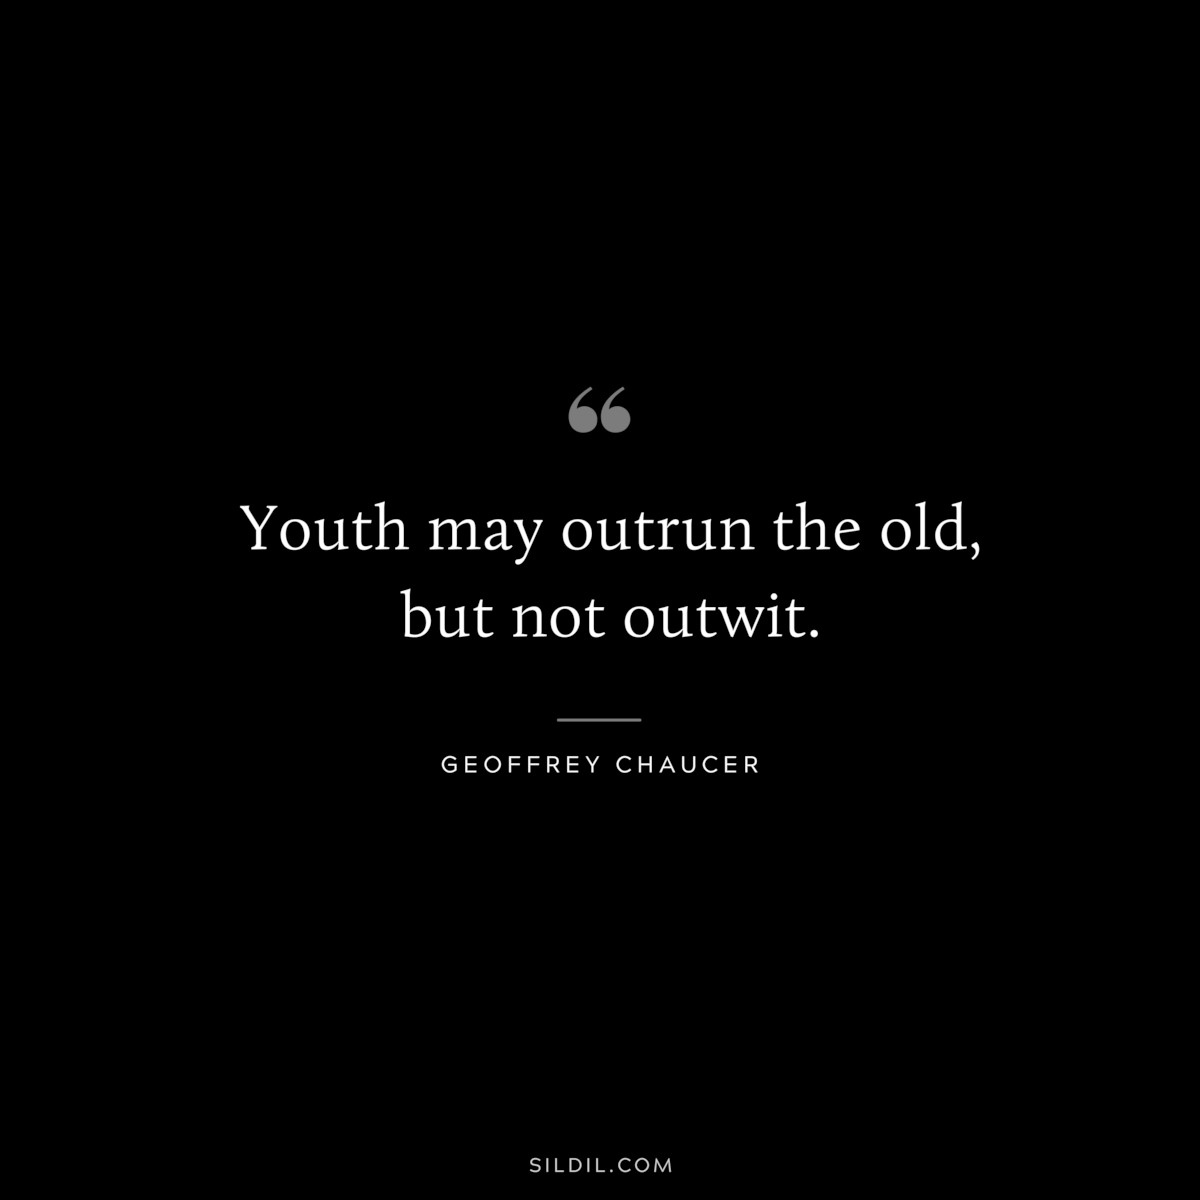 Youth may outrun the old, but not outwit. ― Geoffrey Chaucer